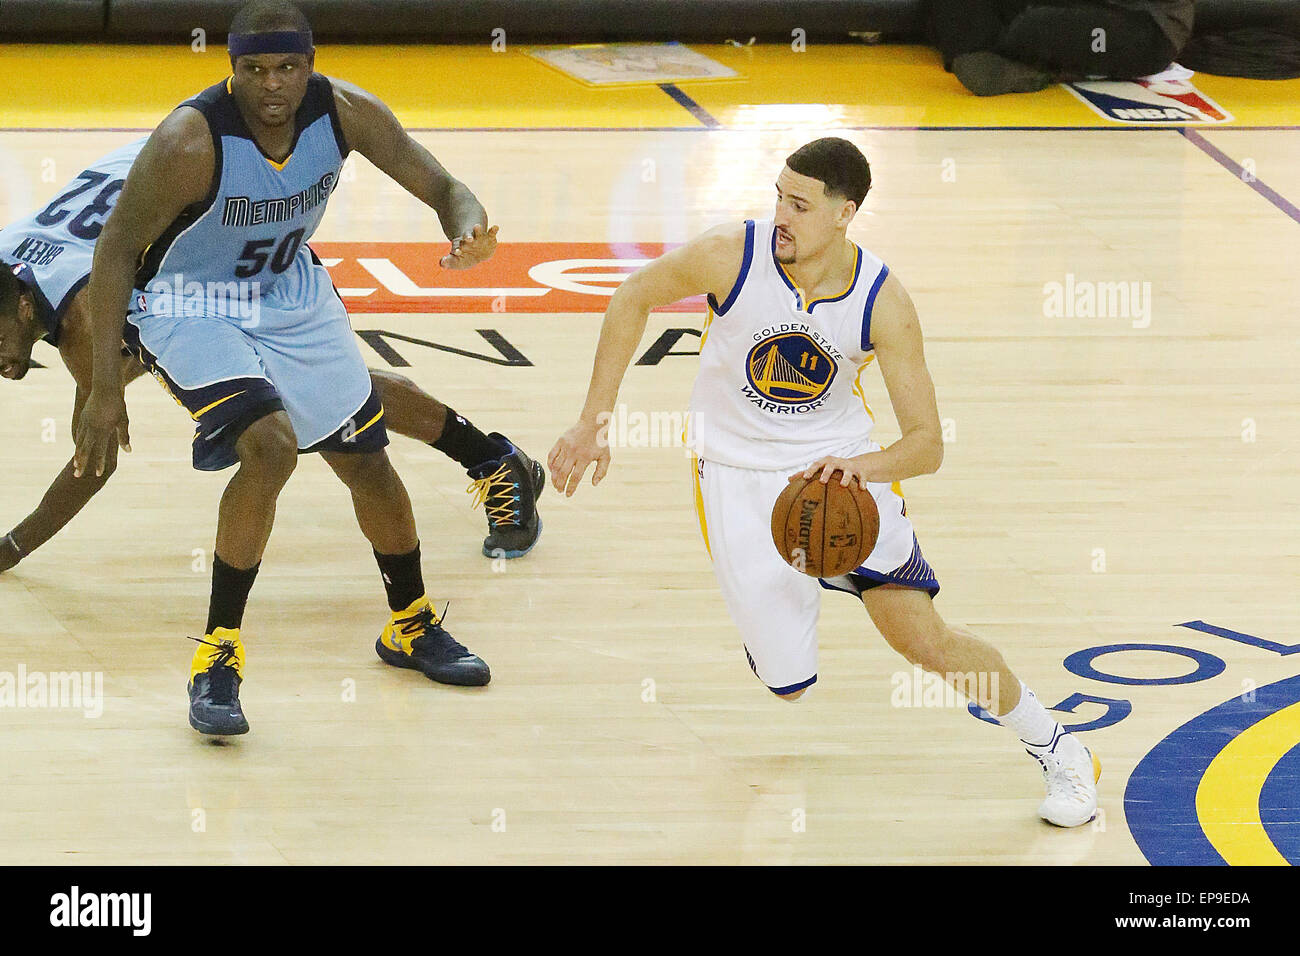 May 14, 2015 - Napa, CA, U.S. - The Golden State Warriors Klay Thompson drives past Zach Randolph and Jeff Green during their 98-78 victory over the Memphis Grizzlies at Oracle Arena in Oakland on Wednesday. The Warriors lead the series 3 games to 2. (Credit Image: © Napa Valley Register/ZUMA Wire) Stock Photo